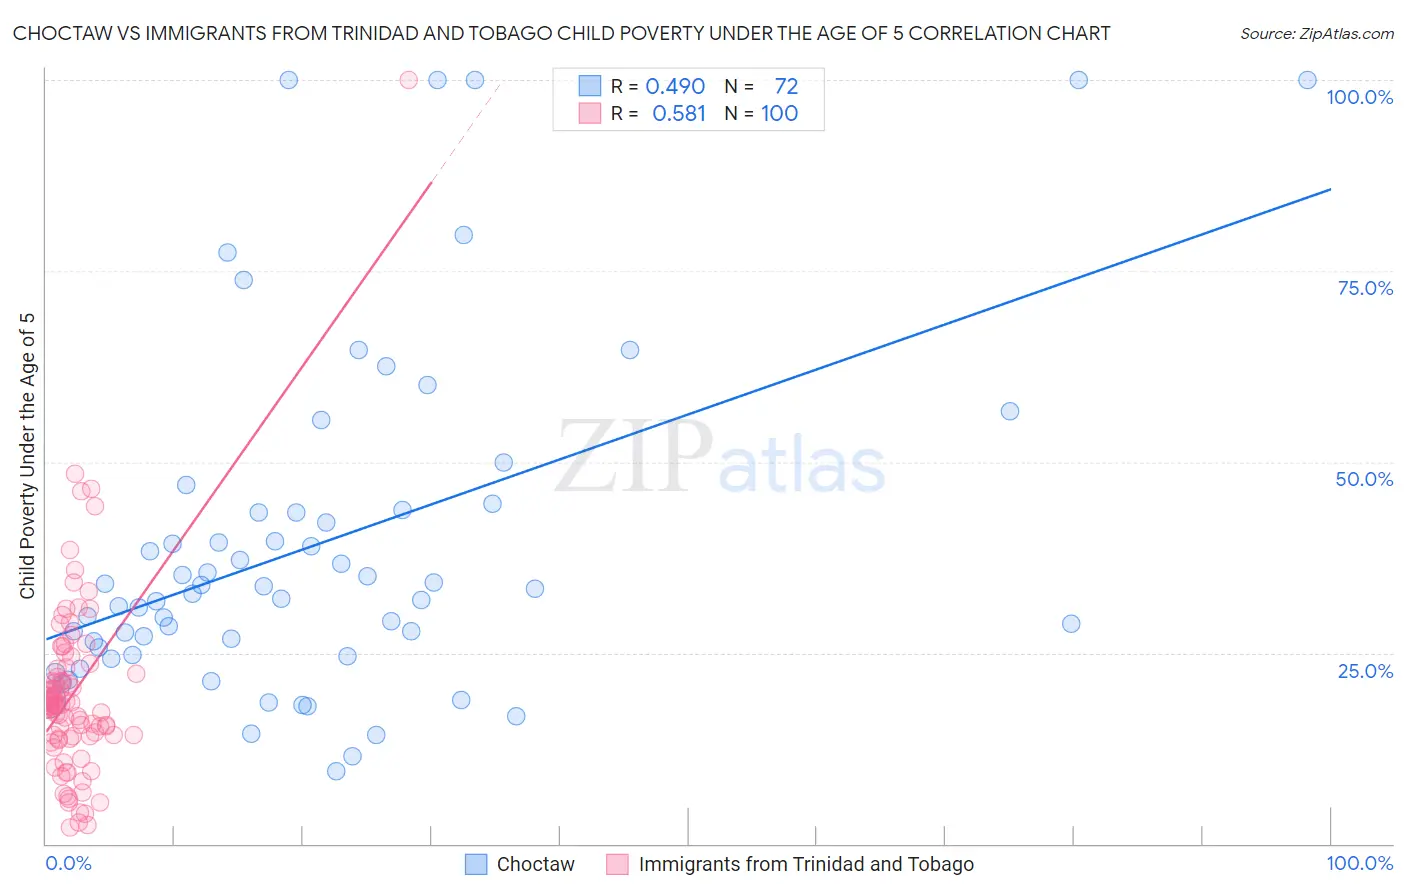 Choctaw vs Immigrants from Trinidad and Tobago Child Poverty Under the Age of 5